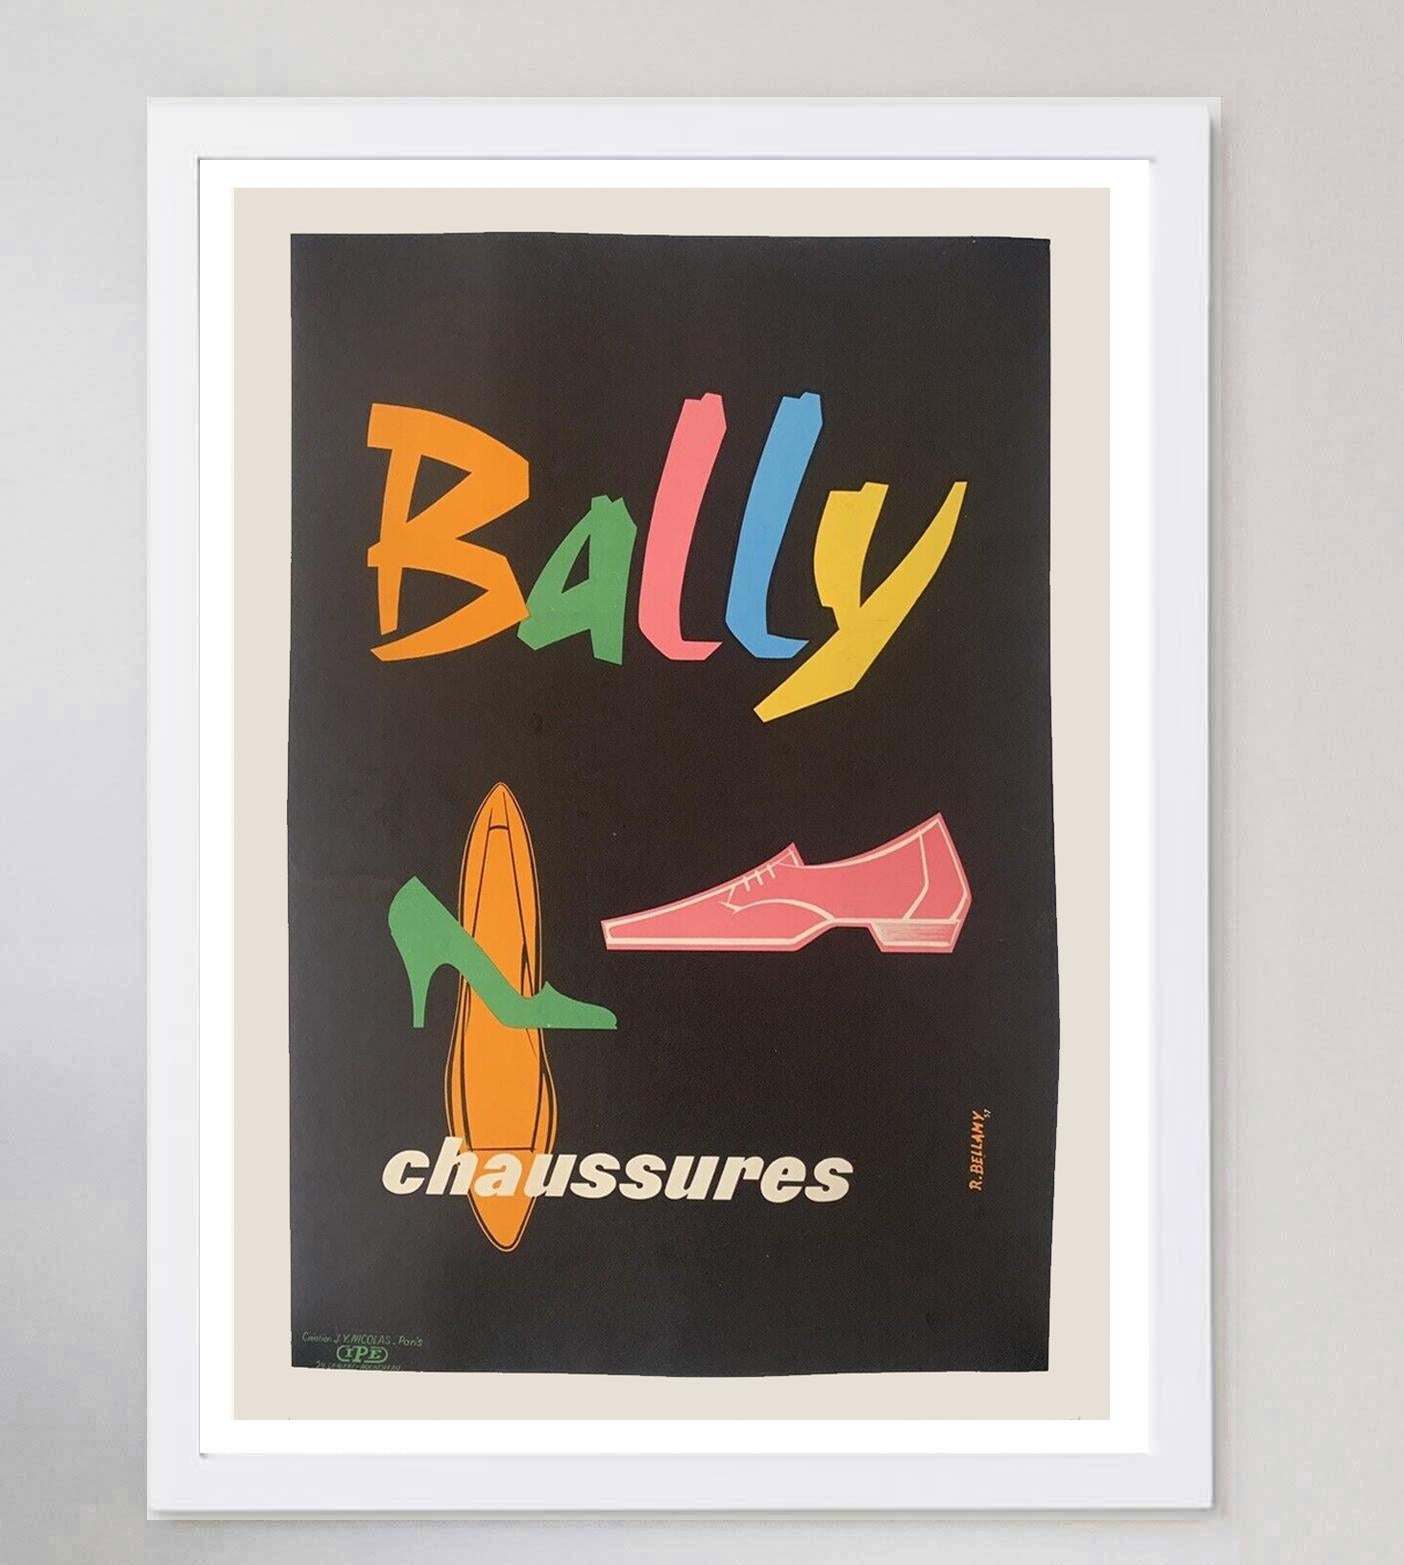 Swiss 1957 Bally - Chaussures Original Vintage Poster For Sale